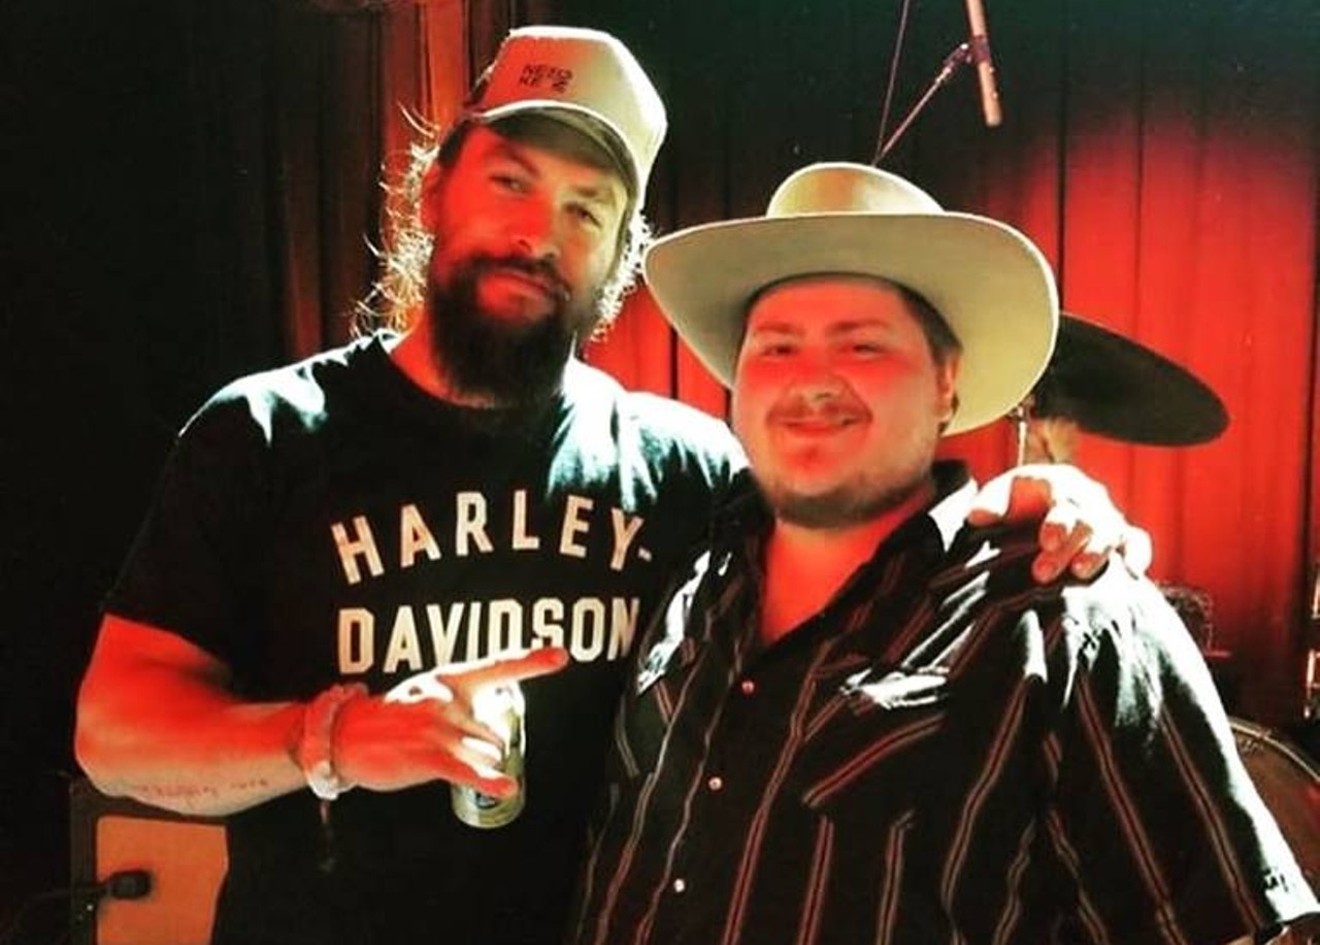 Aquaman Jason Momoa (left) is a fan and supporter of Fort Worth's Vincent Neil Emerson (right), who's playing at Legacy Hall on Friday night, probably without Aquaman. But you never know.